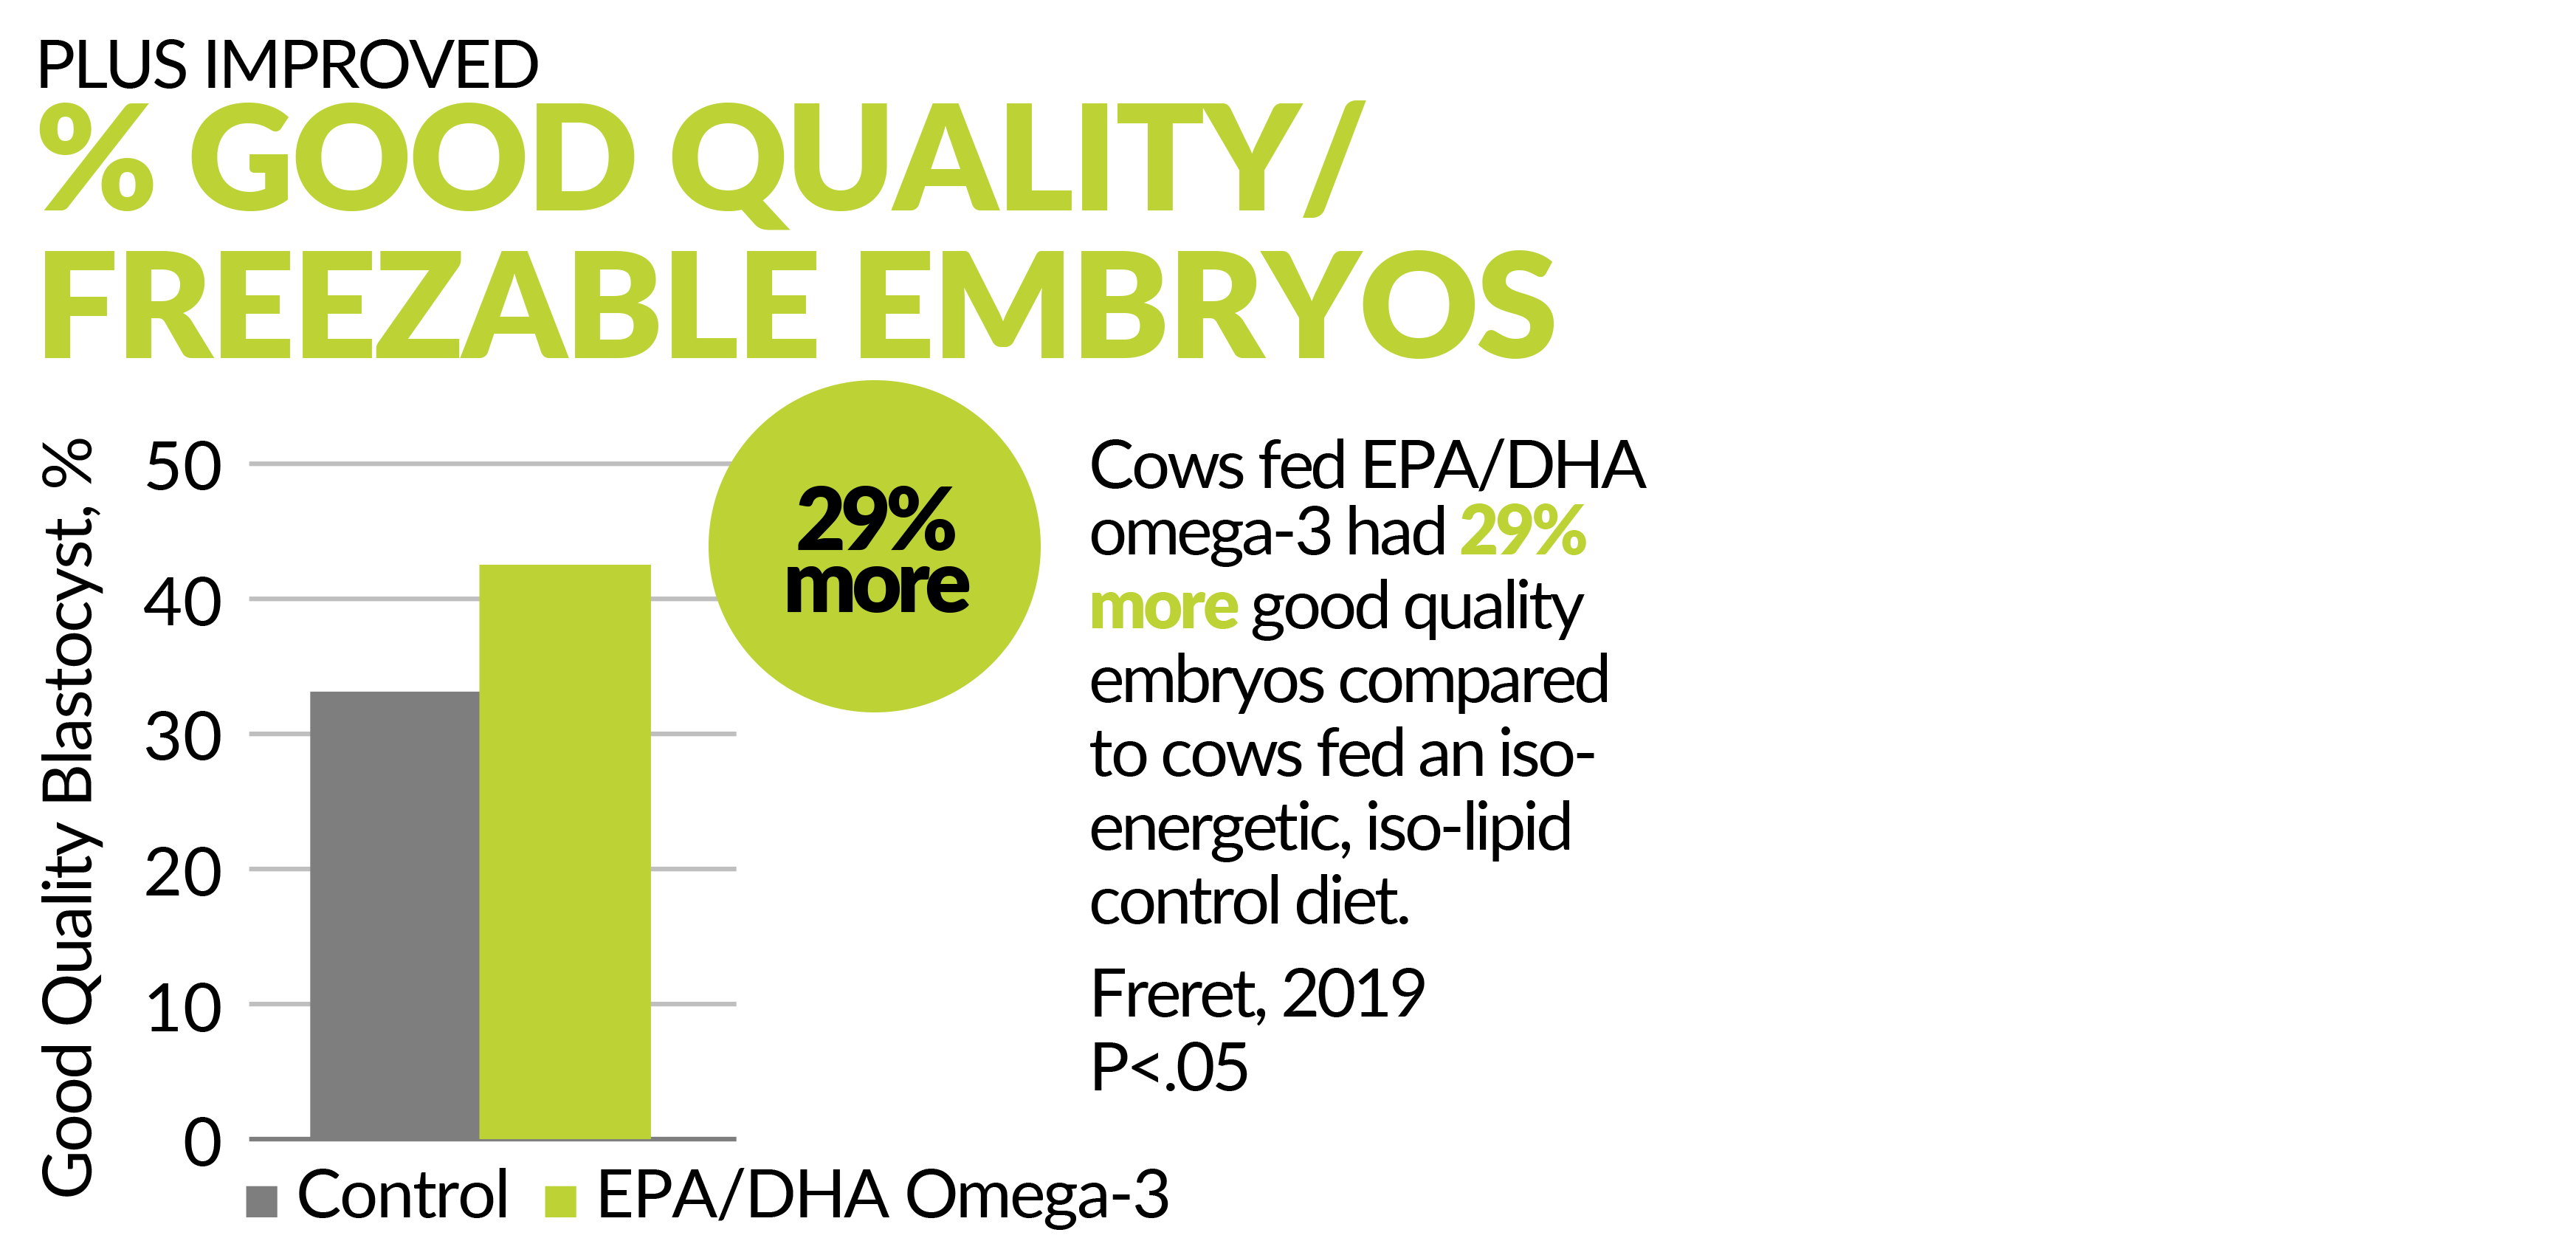 Improved % Good Quality/Freezable Embryos